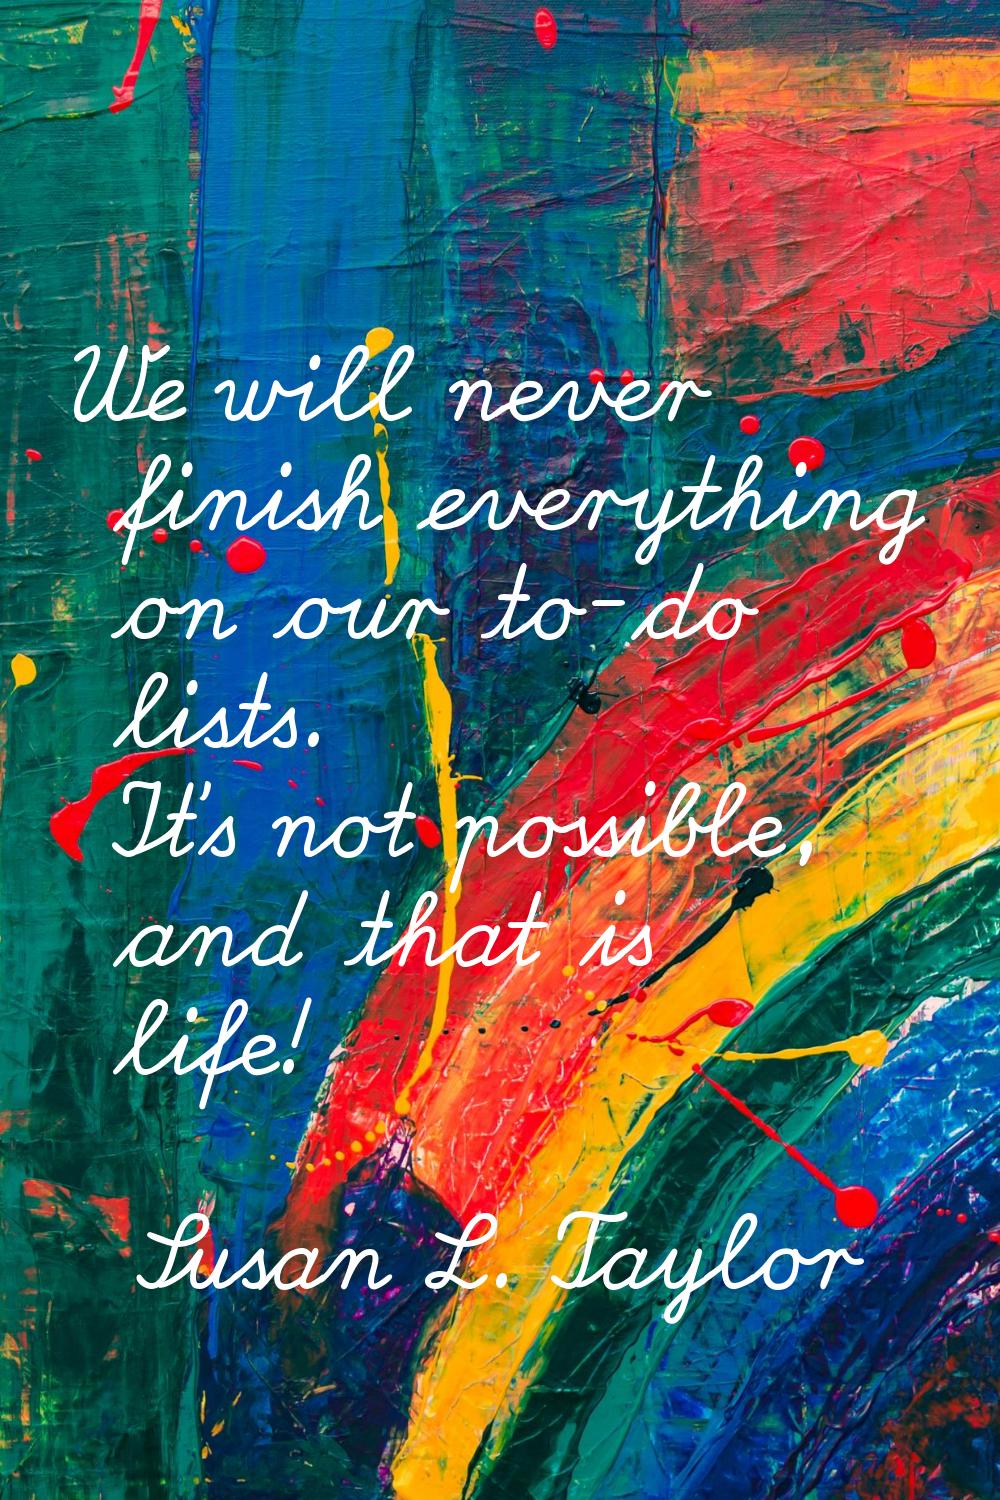 We will never finish everything on our to-do lists. It's not possible, and that is life!